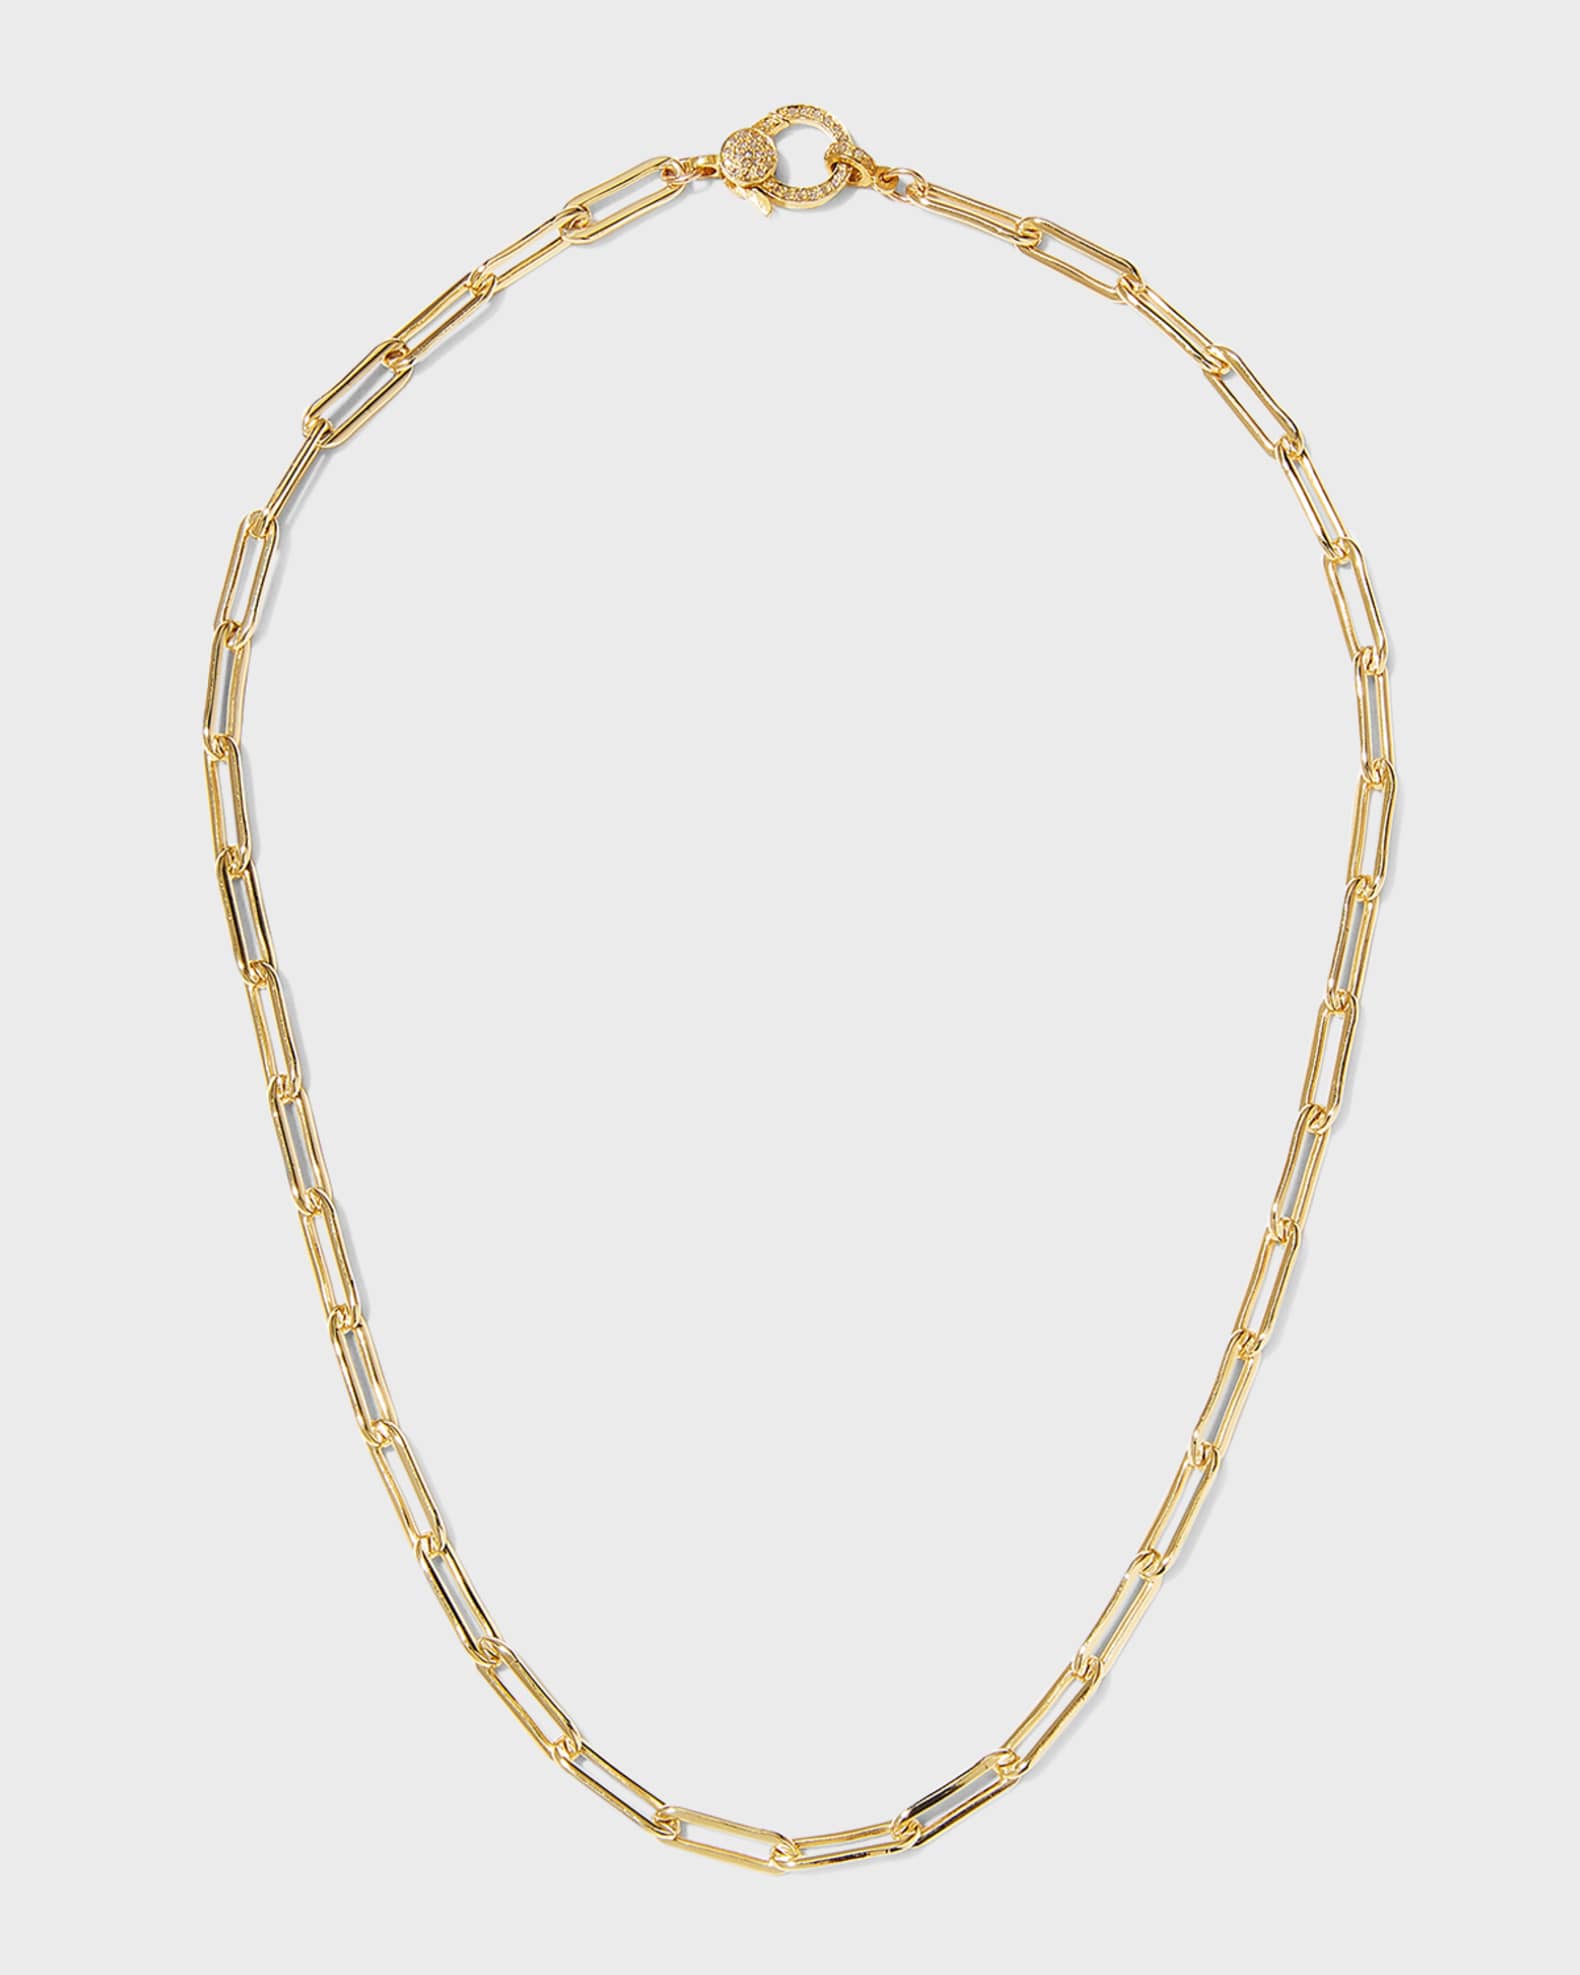 Yellow Gold Vermeil Paper Clip Necklace - With Engraved Yellow Gold Heart  Charm - 18 Inch